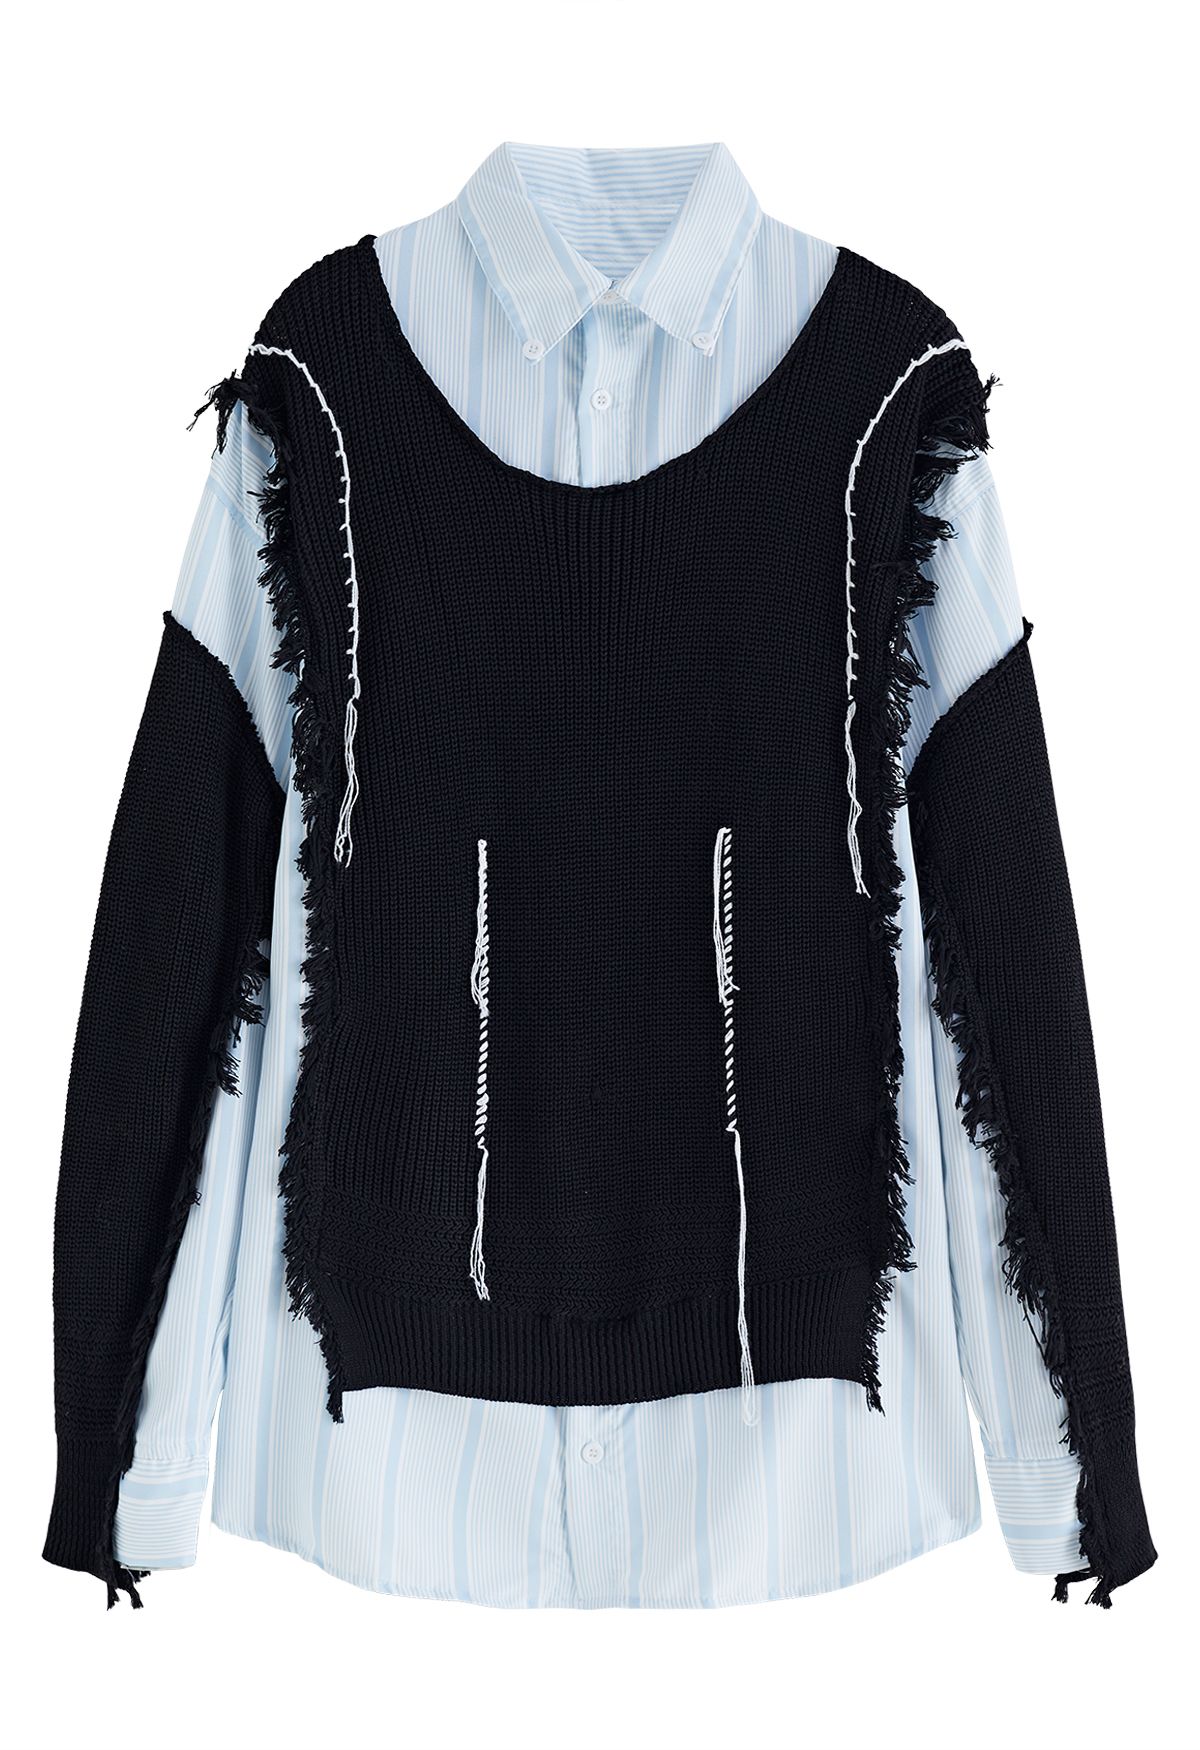 Frayed Detail Knit Spliced Striped Oversized Shirt in Black